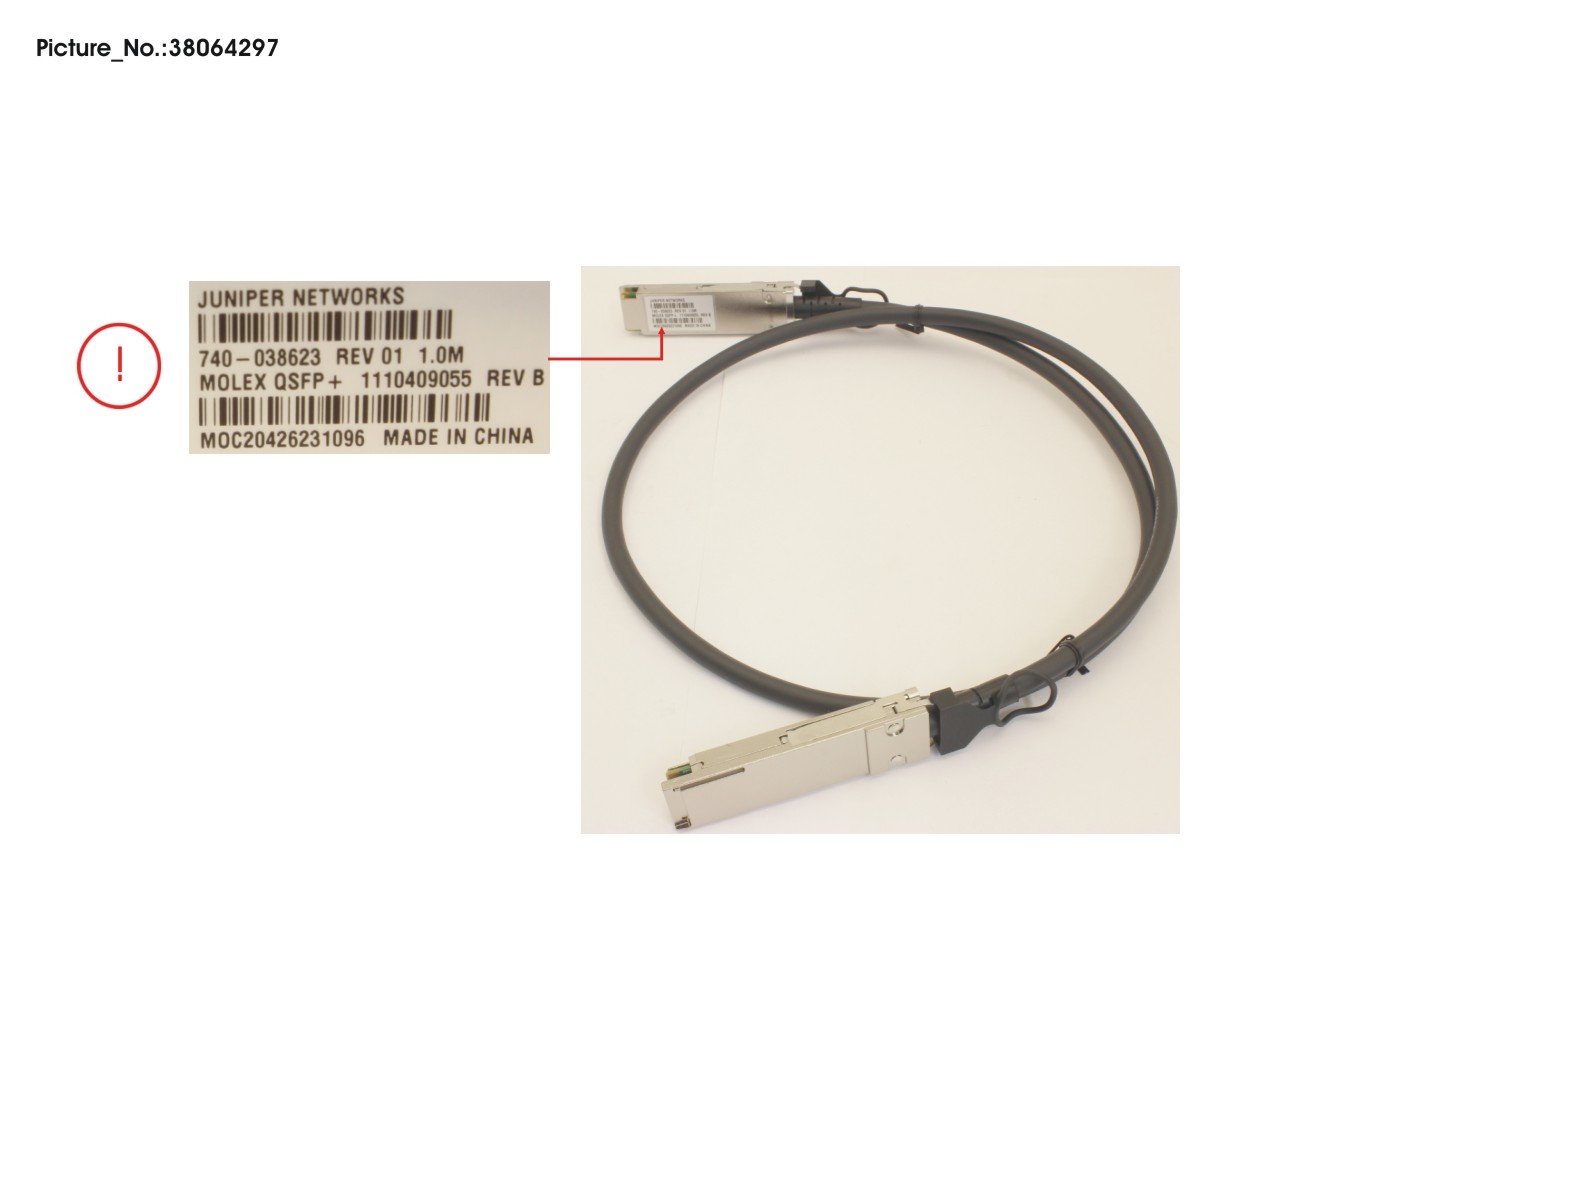 40G QSFP+ DIRECT ATTACHED CABLE 1M